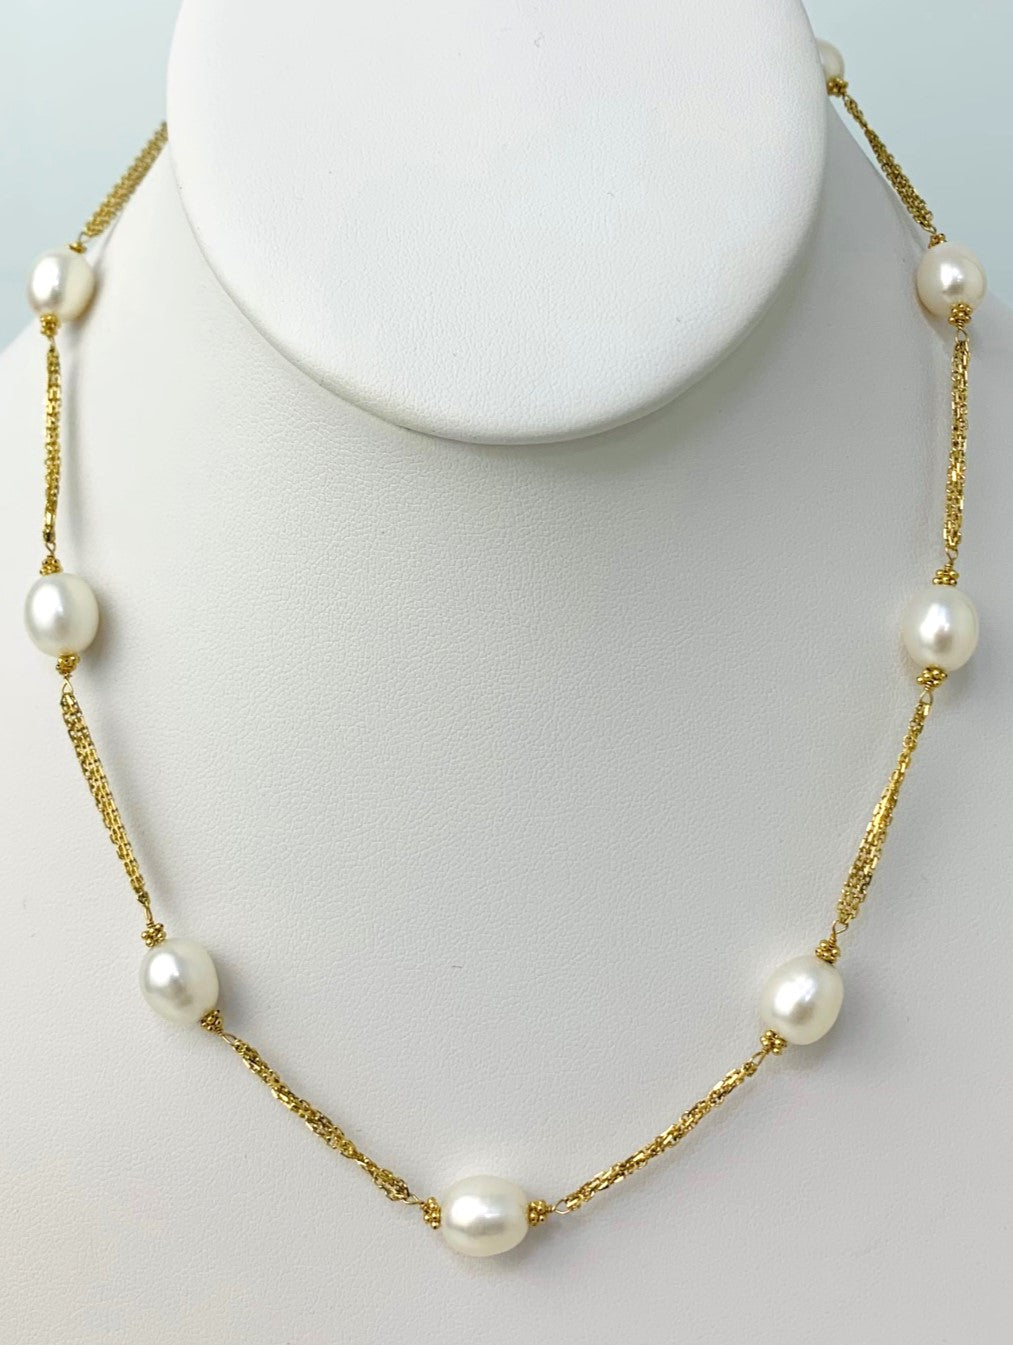 17" Triple Chain White Freshwater Pearl Station Necklace in 14KY - NCK-196-3TNCPRL14Y-WH-17